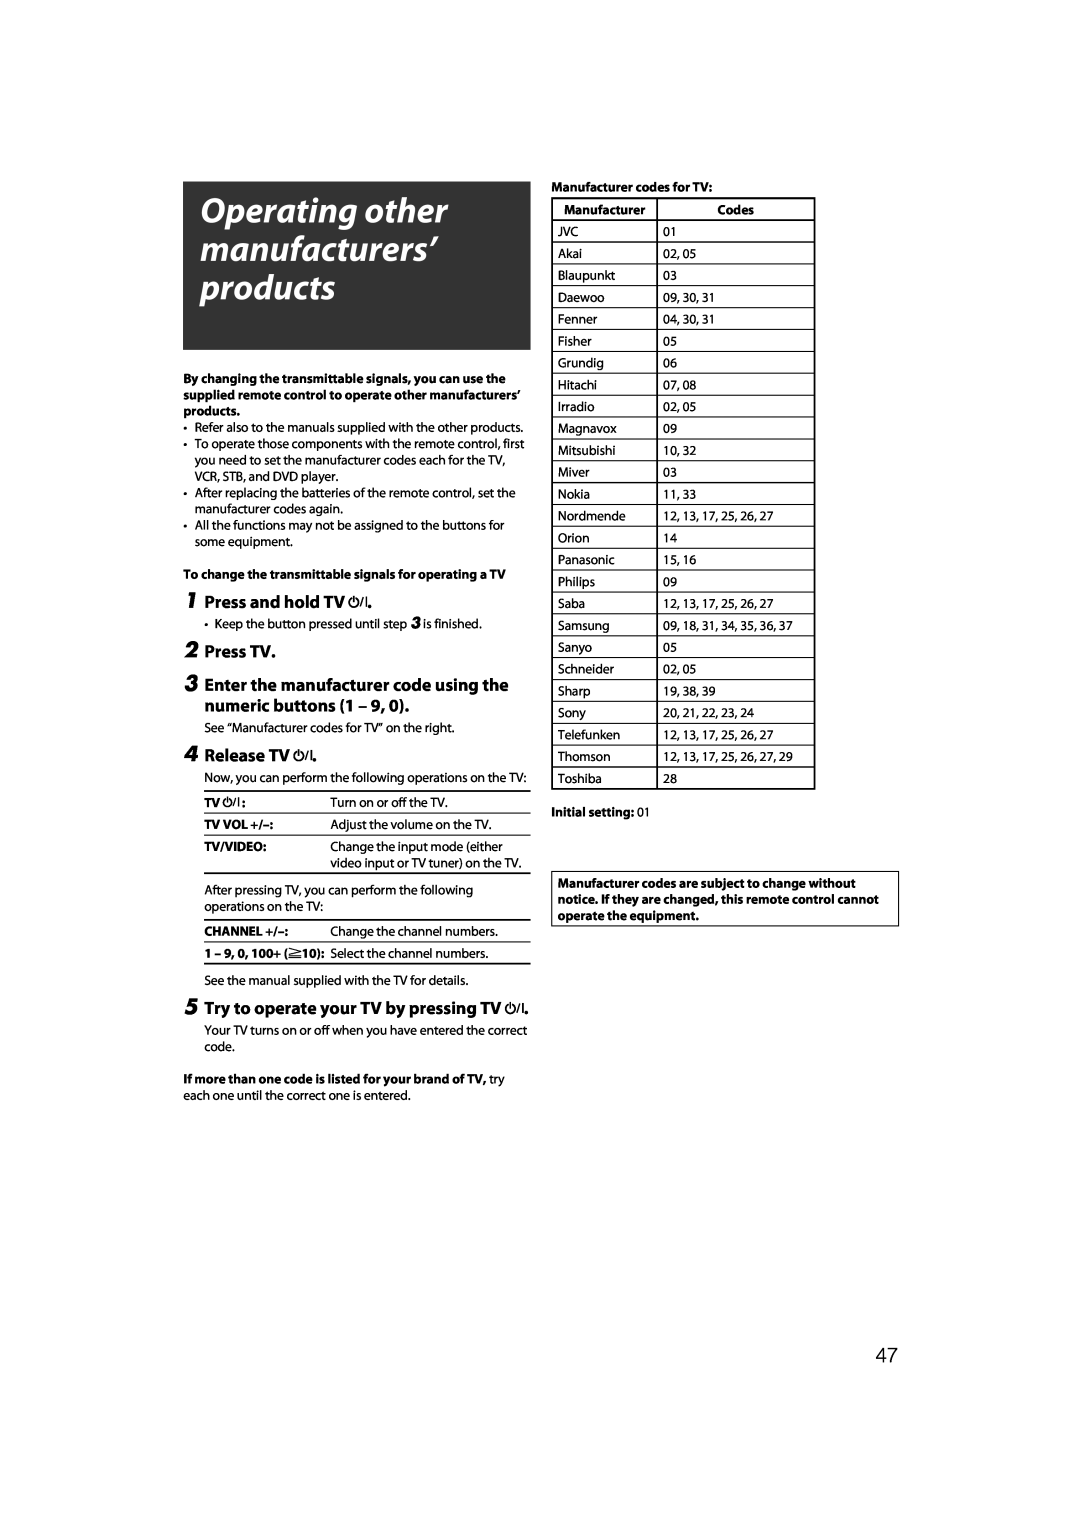 JVC RX-D411S manual Manufacturer codes for TV, Codes, Initial setting 